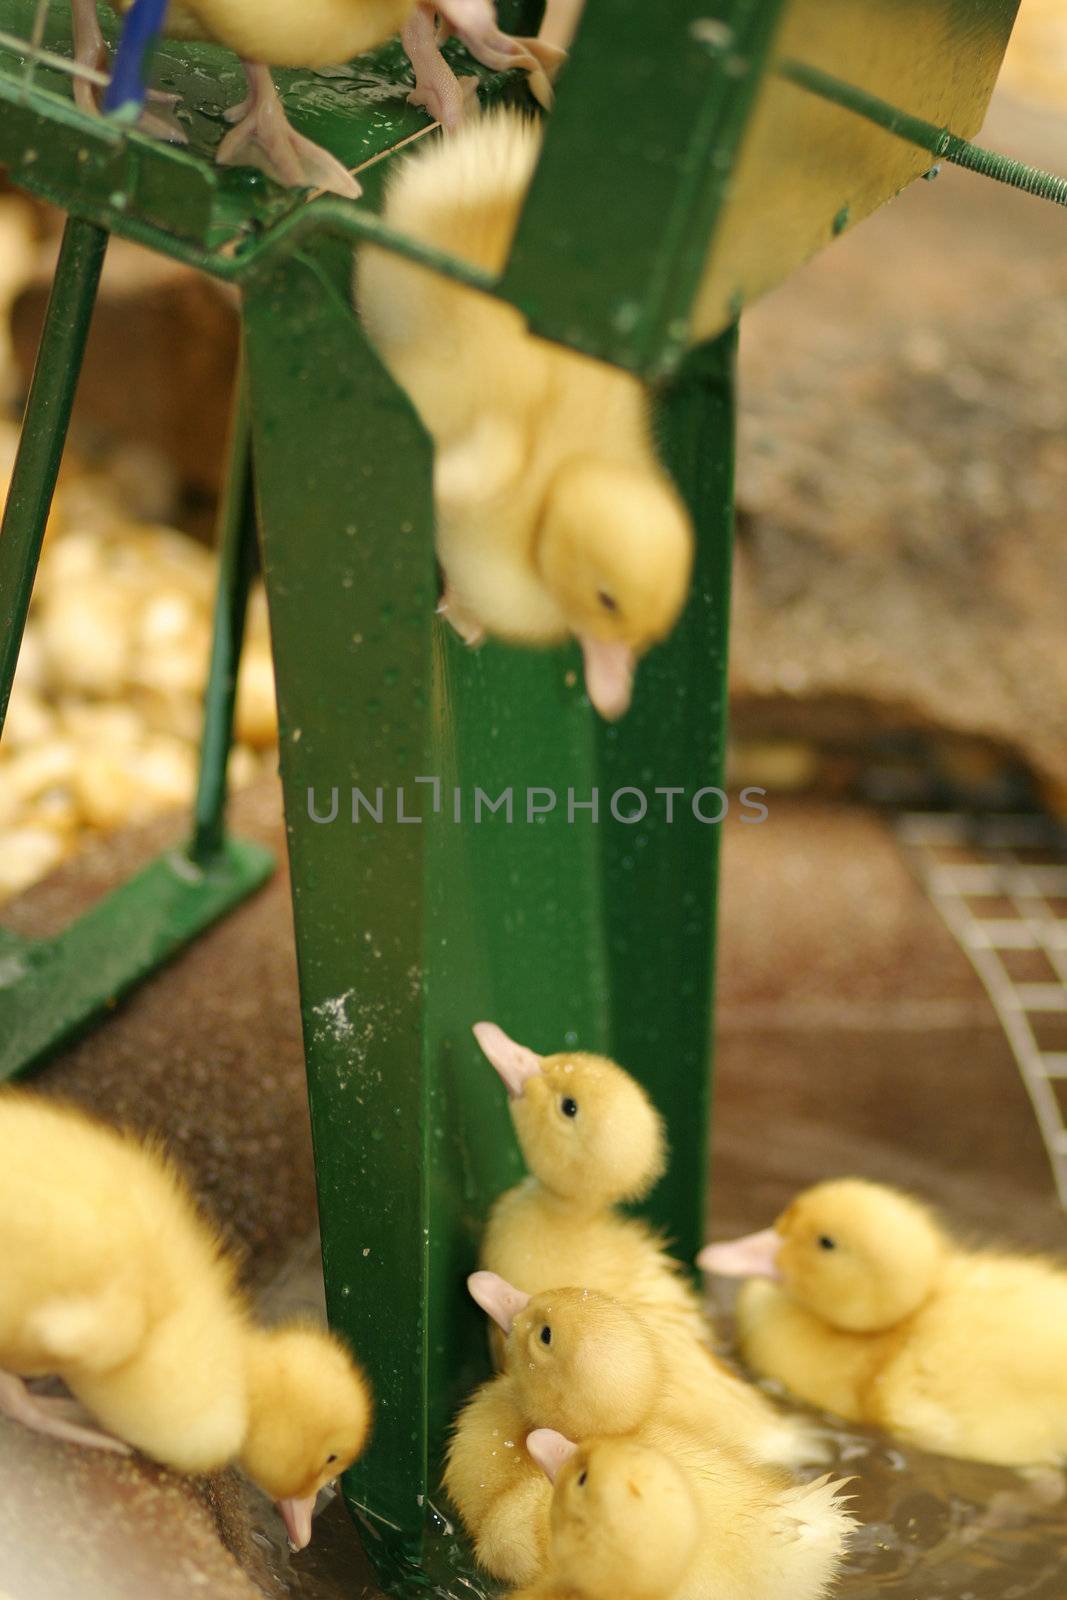 Baby ducks  having fun.  Focus on the middle duck at bottom of slide.  The duckling on the slide is in motion as another awaits his turn.